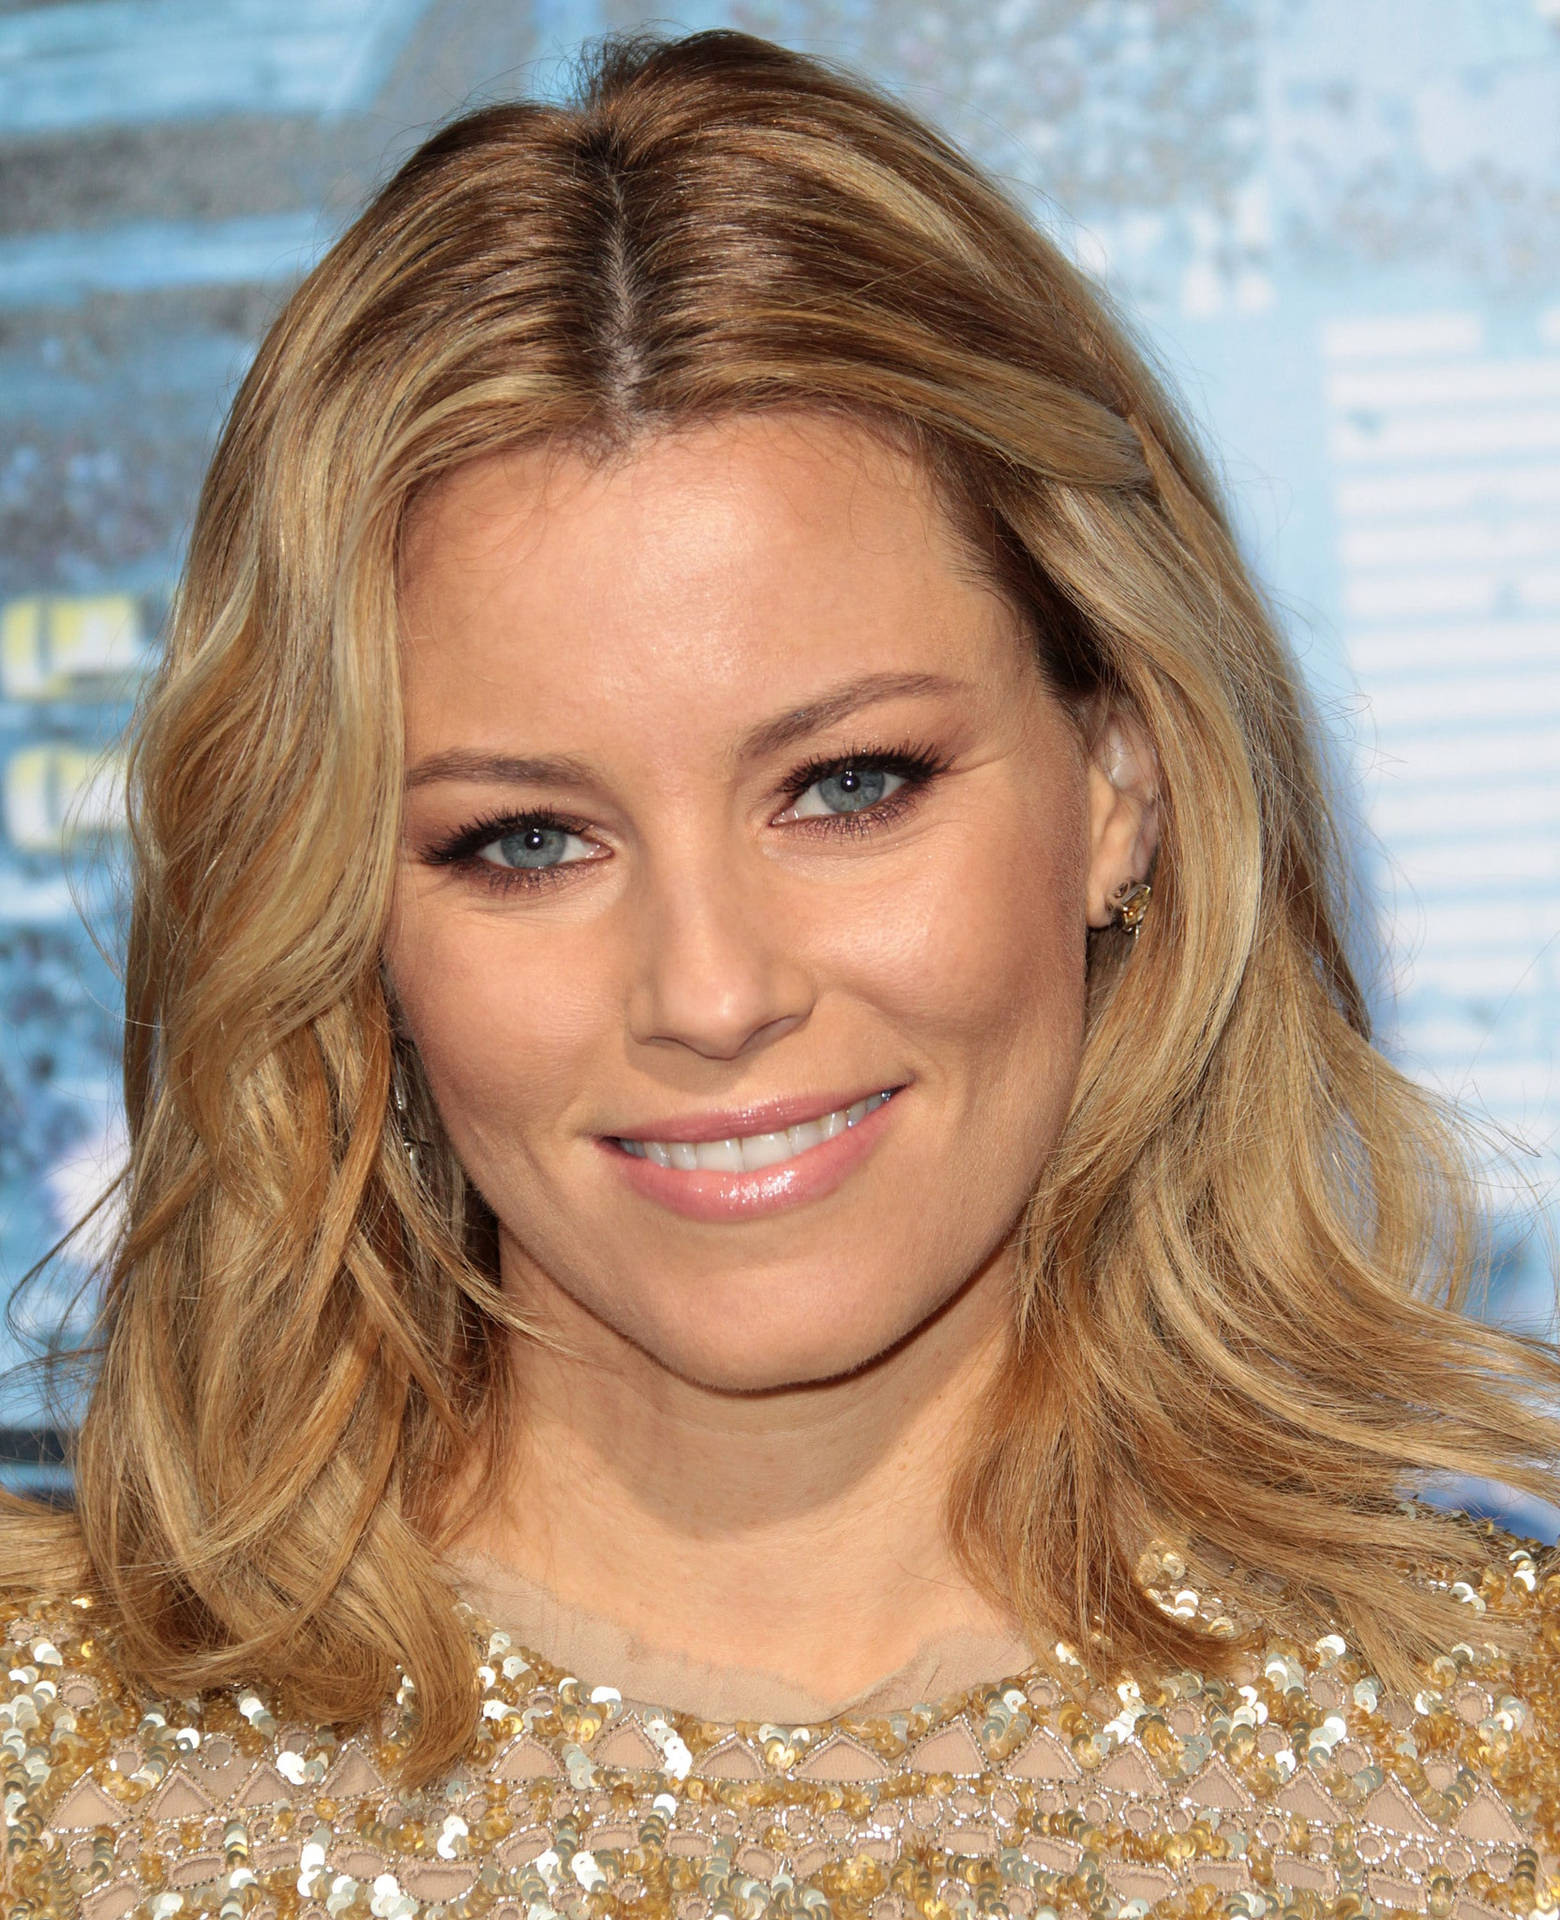 Caption: Elizabeth Banks In Her Role In Pitch Perfect